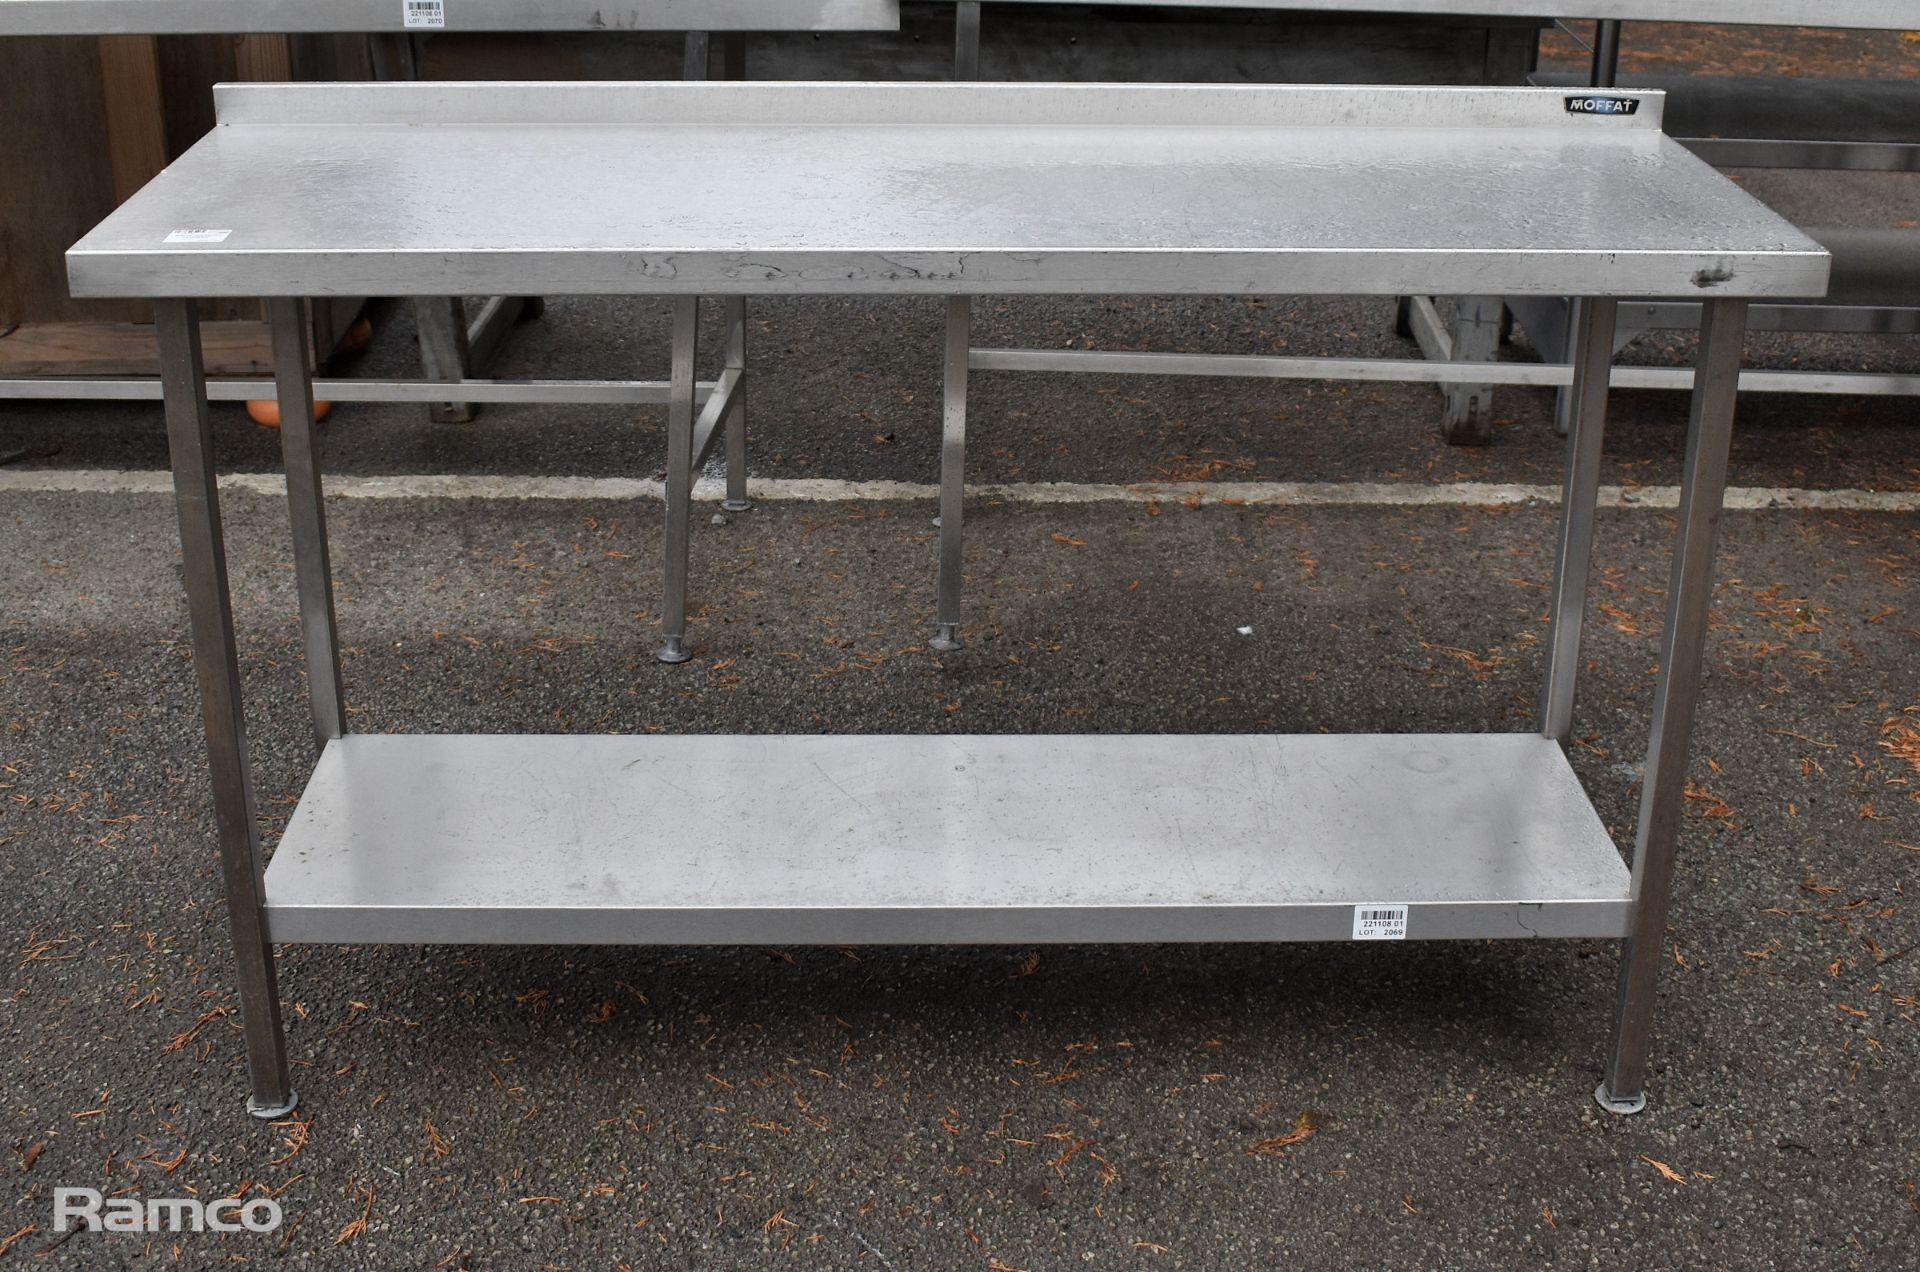 Moffat stainless steel table with undershelf - 150x50x94cm